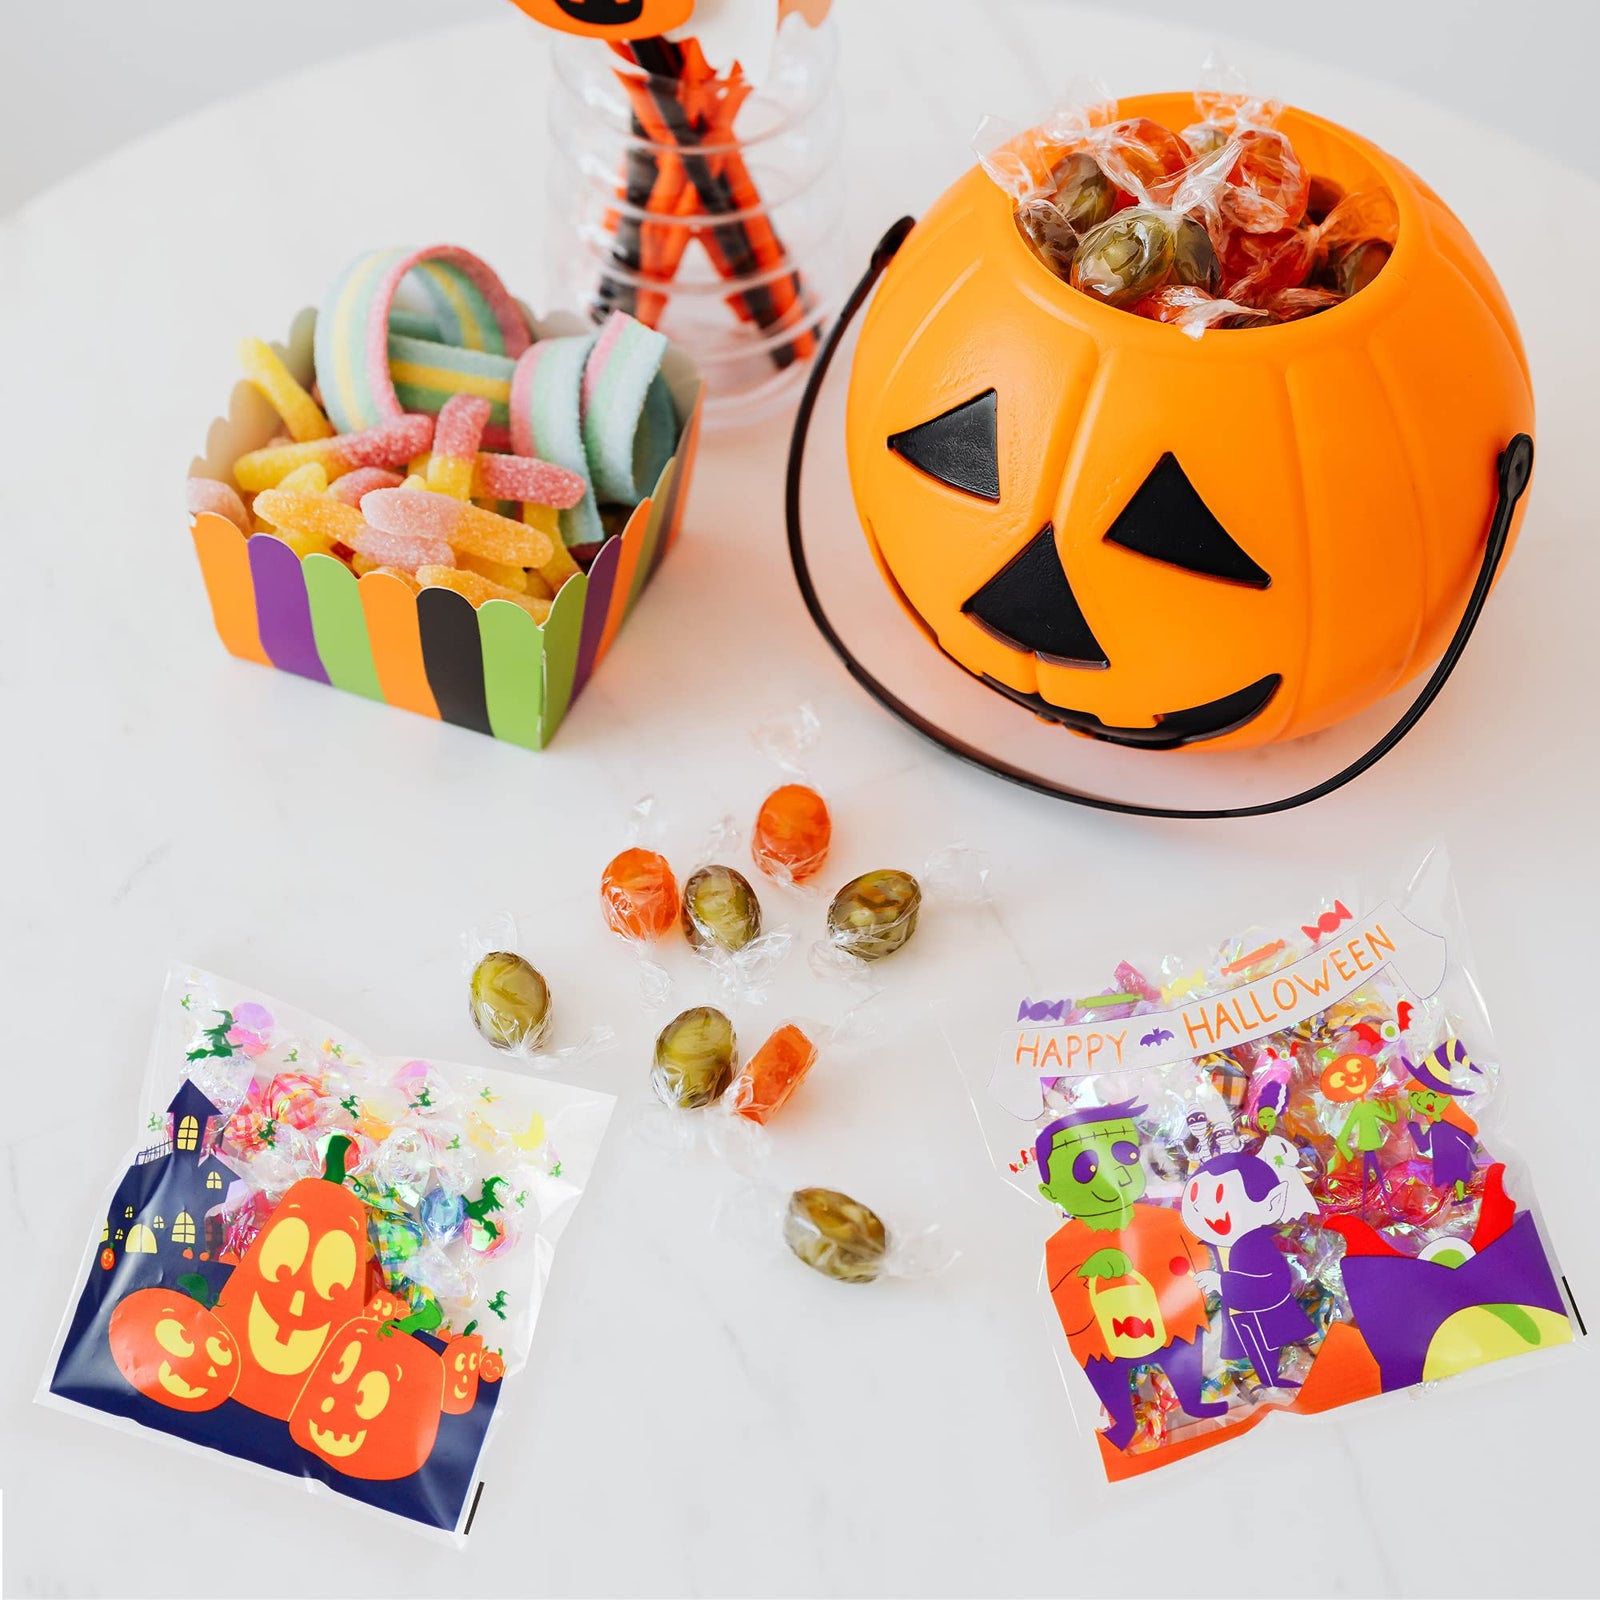 JOYIN 150 PCS Halloween Cellophane Treat Bags, Halloween Clear Self-adhesive Candy Bags, Halloween Plastic Cookie Bags for Trick or Treat, Halloween Goodie Bags for Party Favor Supplies